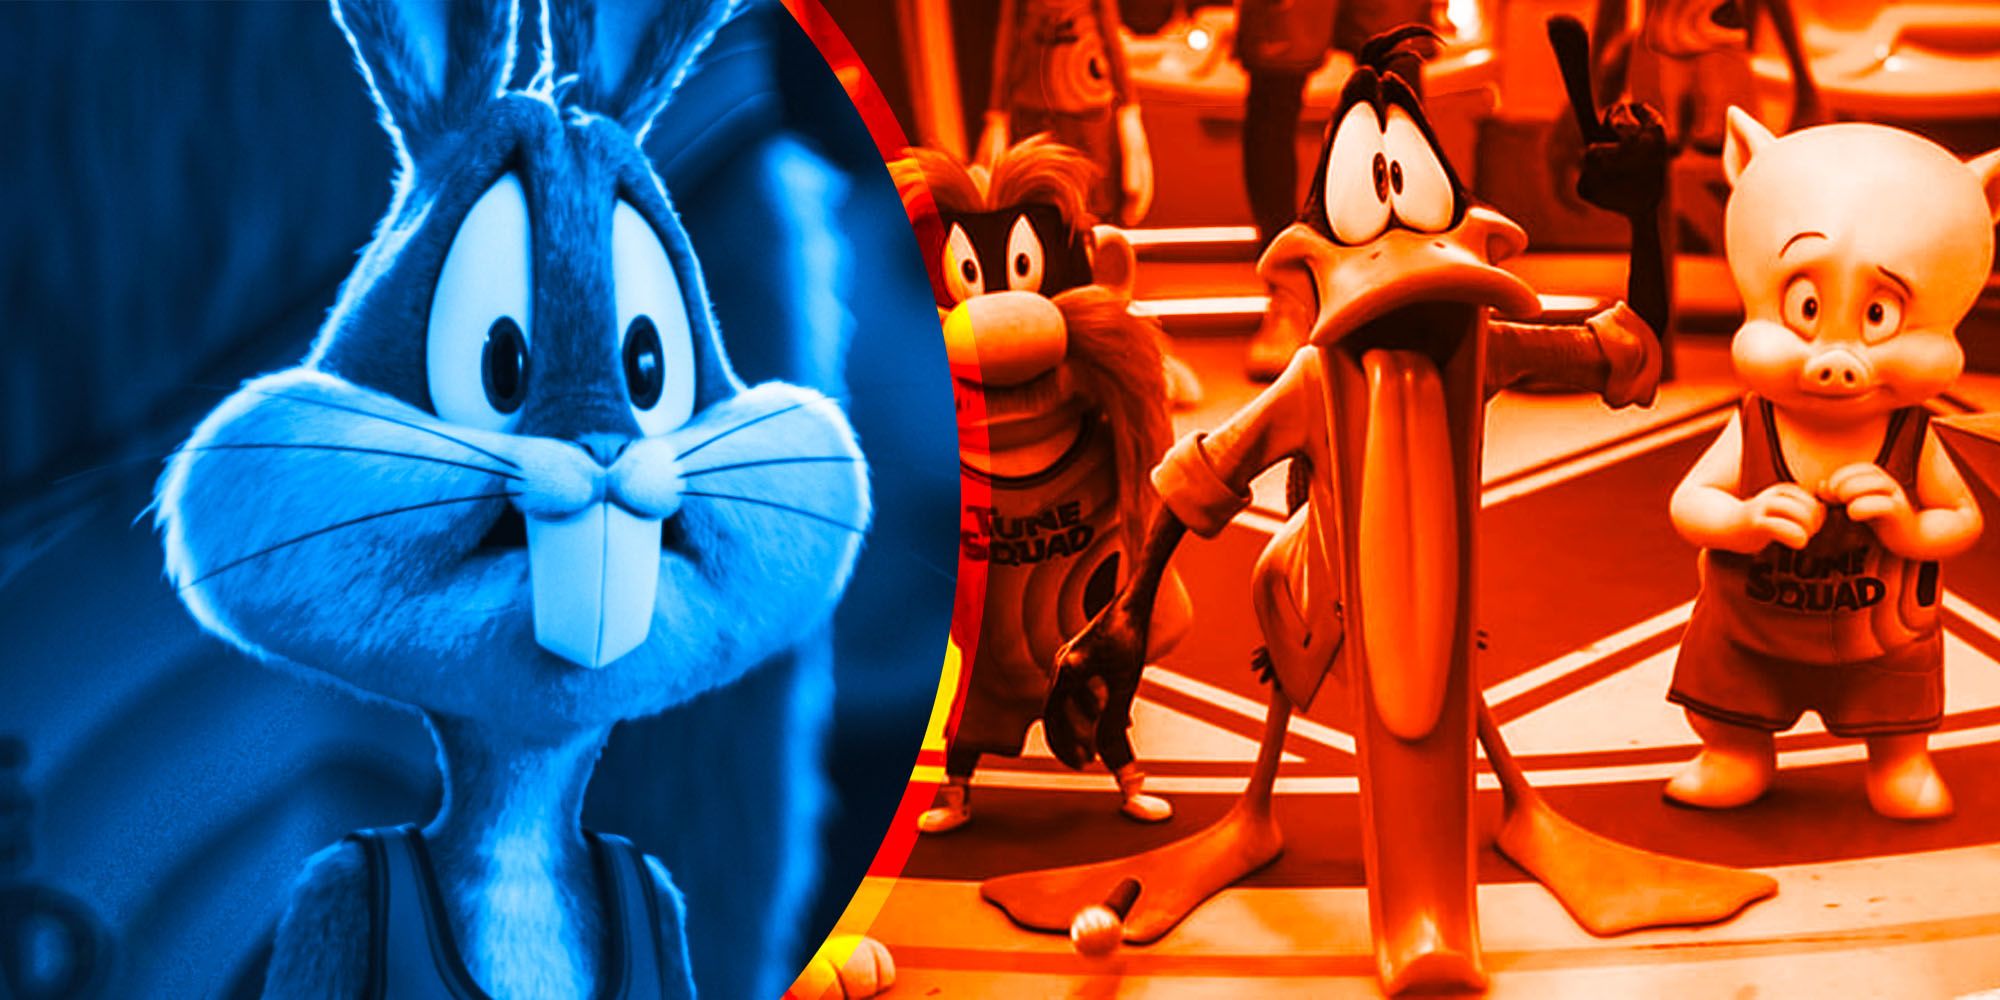 Space Jam a new legacy disappointing box office Bugs bunny Daffy Duck